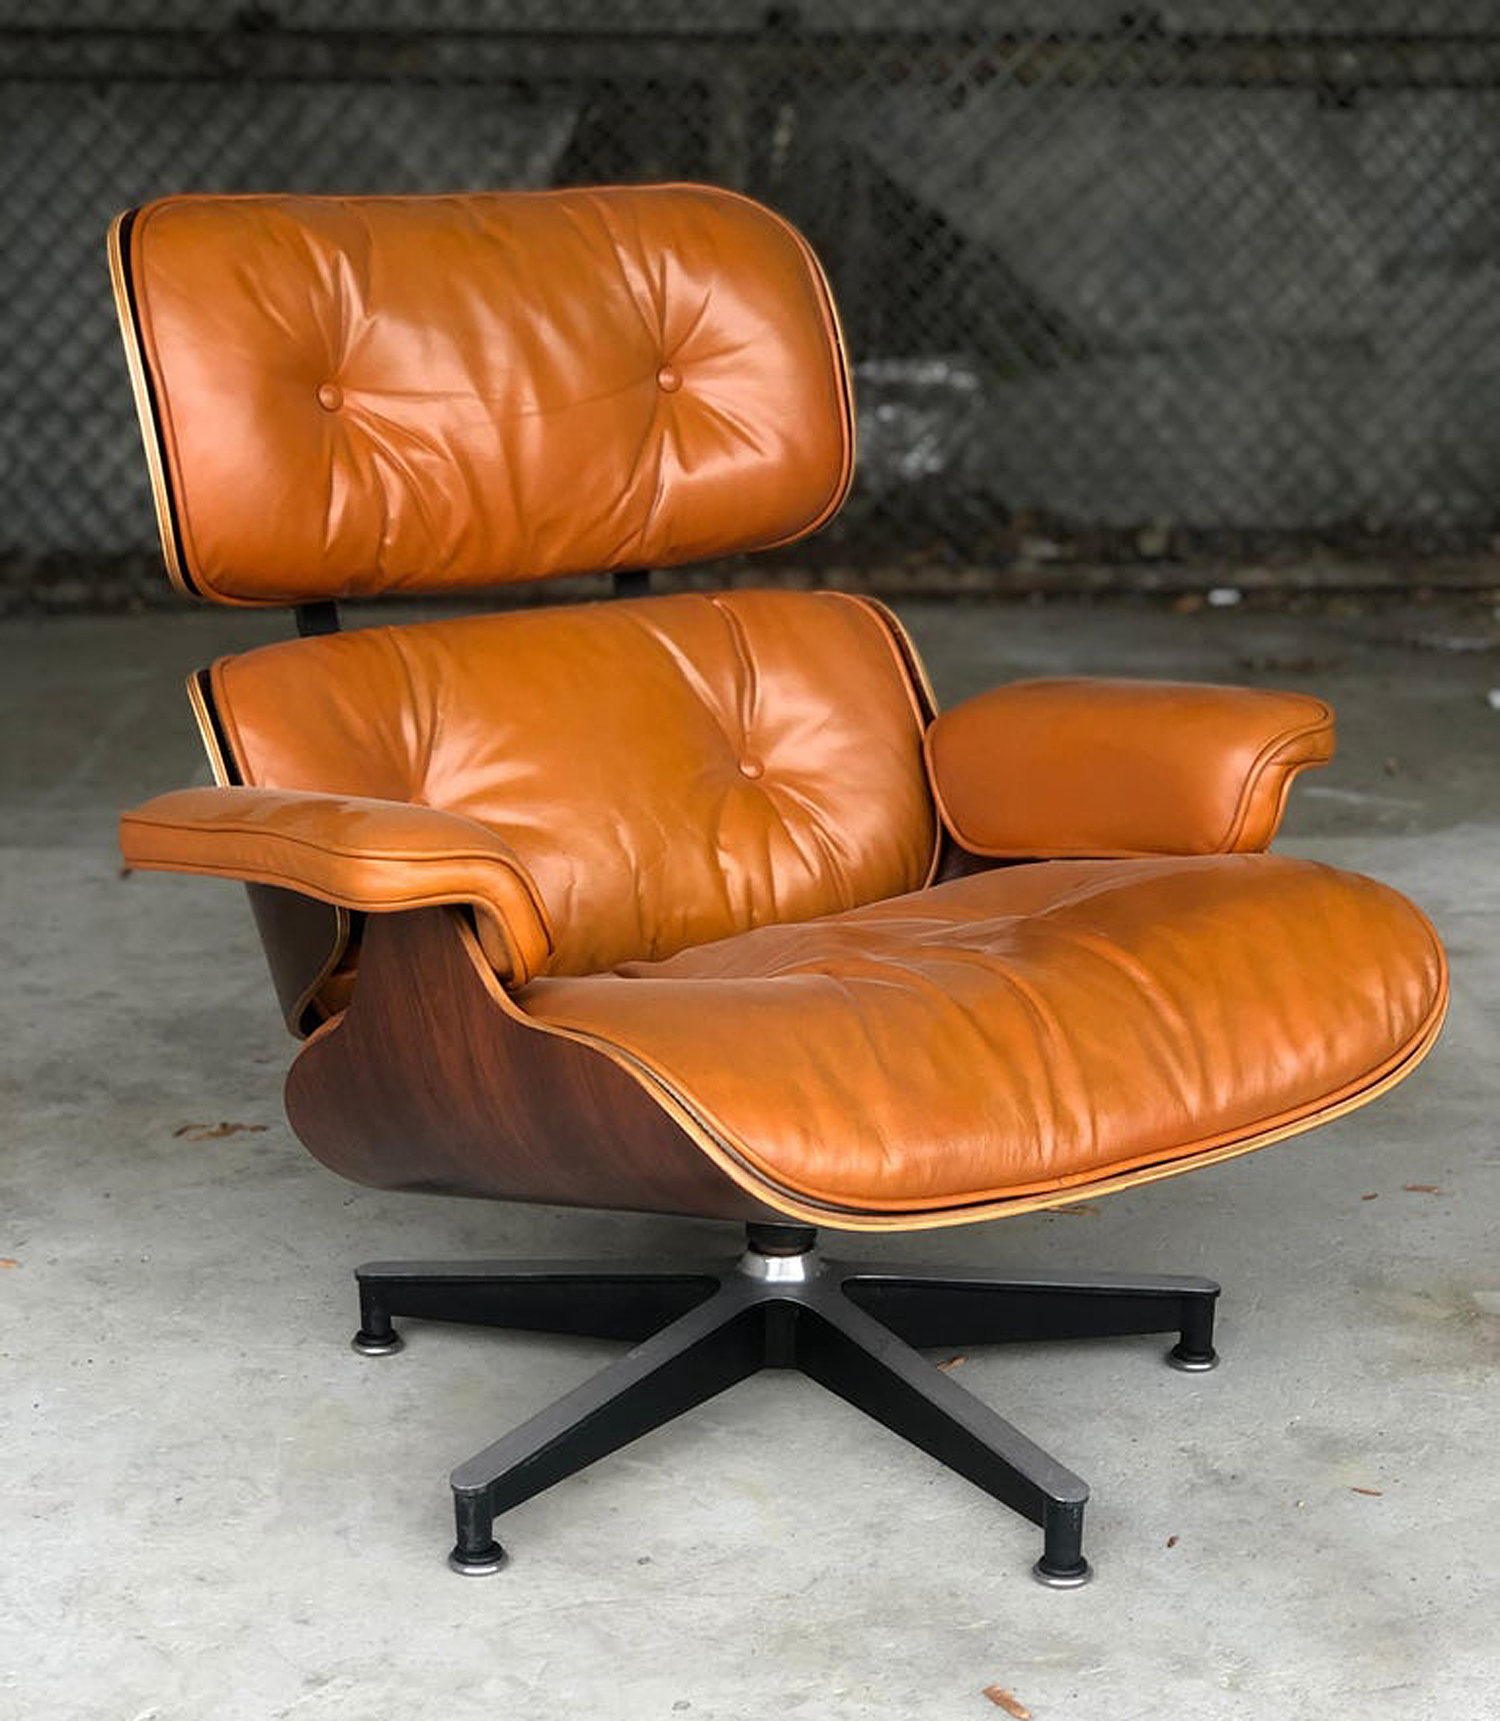 Uitwerpselen voorkant Kaal Vintage Eames Chairs Make a Handsome (and Sustainable) Christmas Gift -  InsideHook